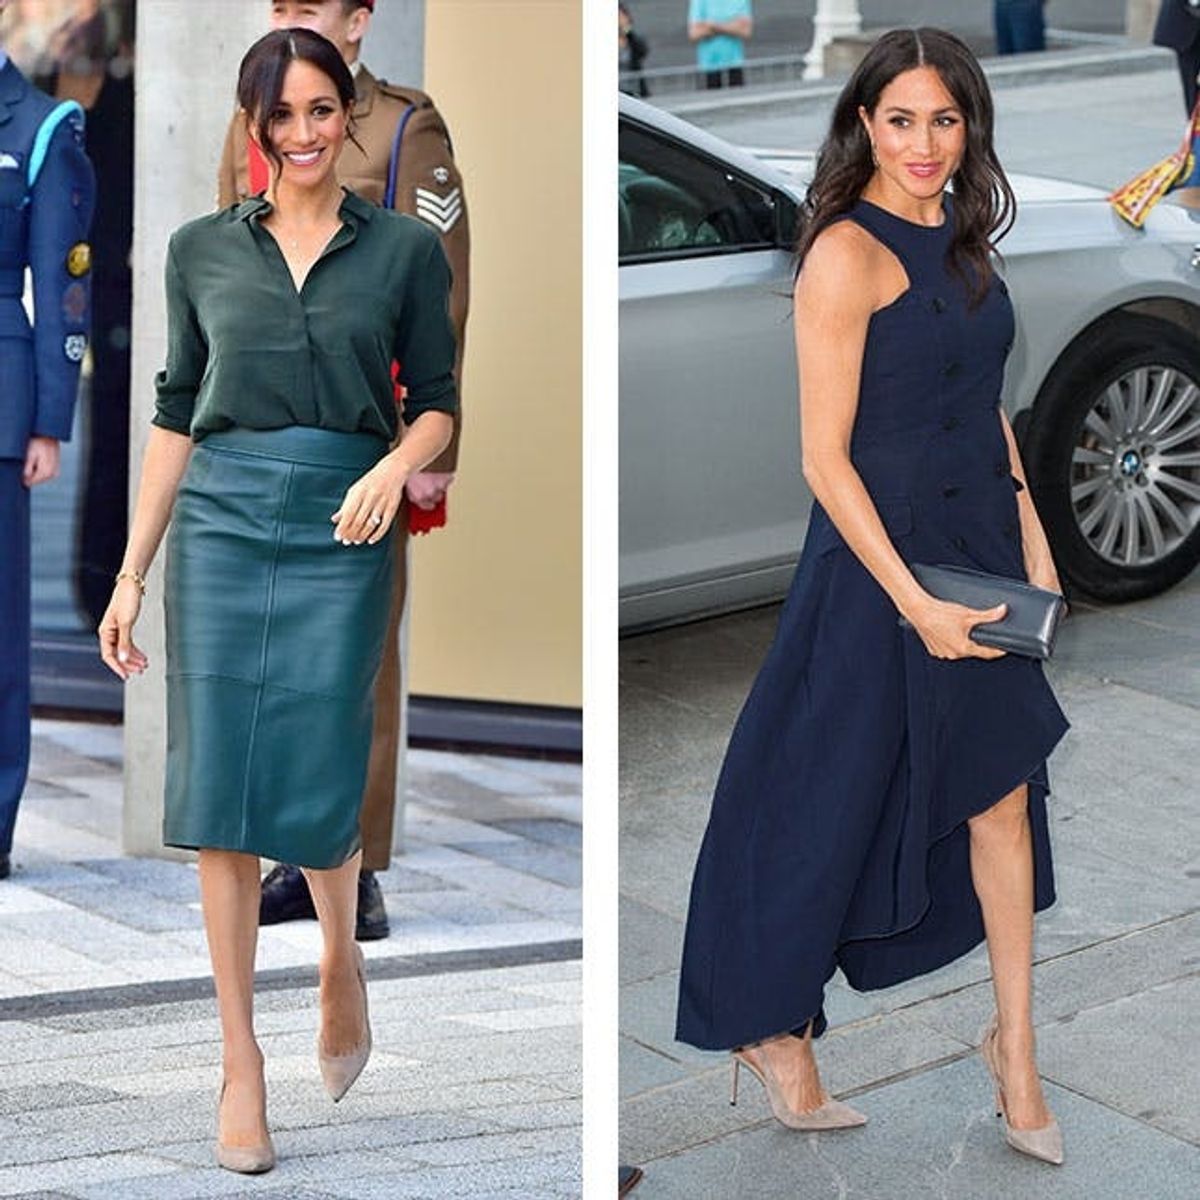 The 2019 Fashion Trends We Want to See Meghan Markle Wear